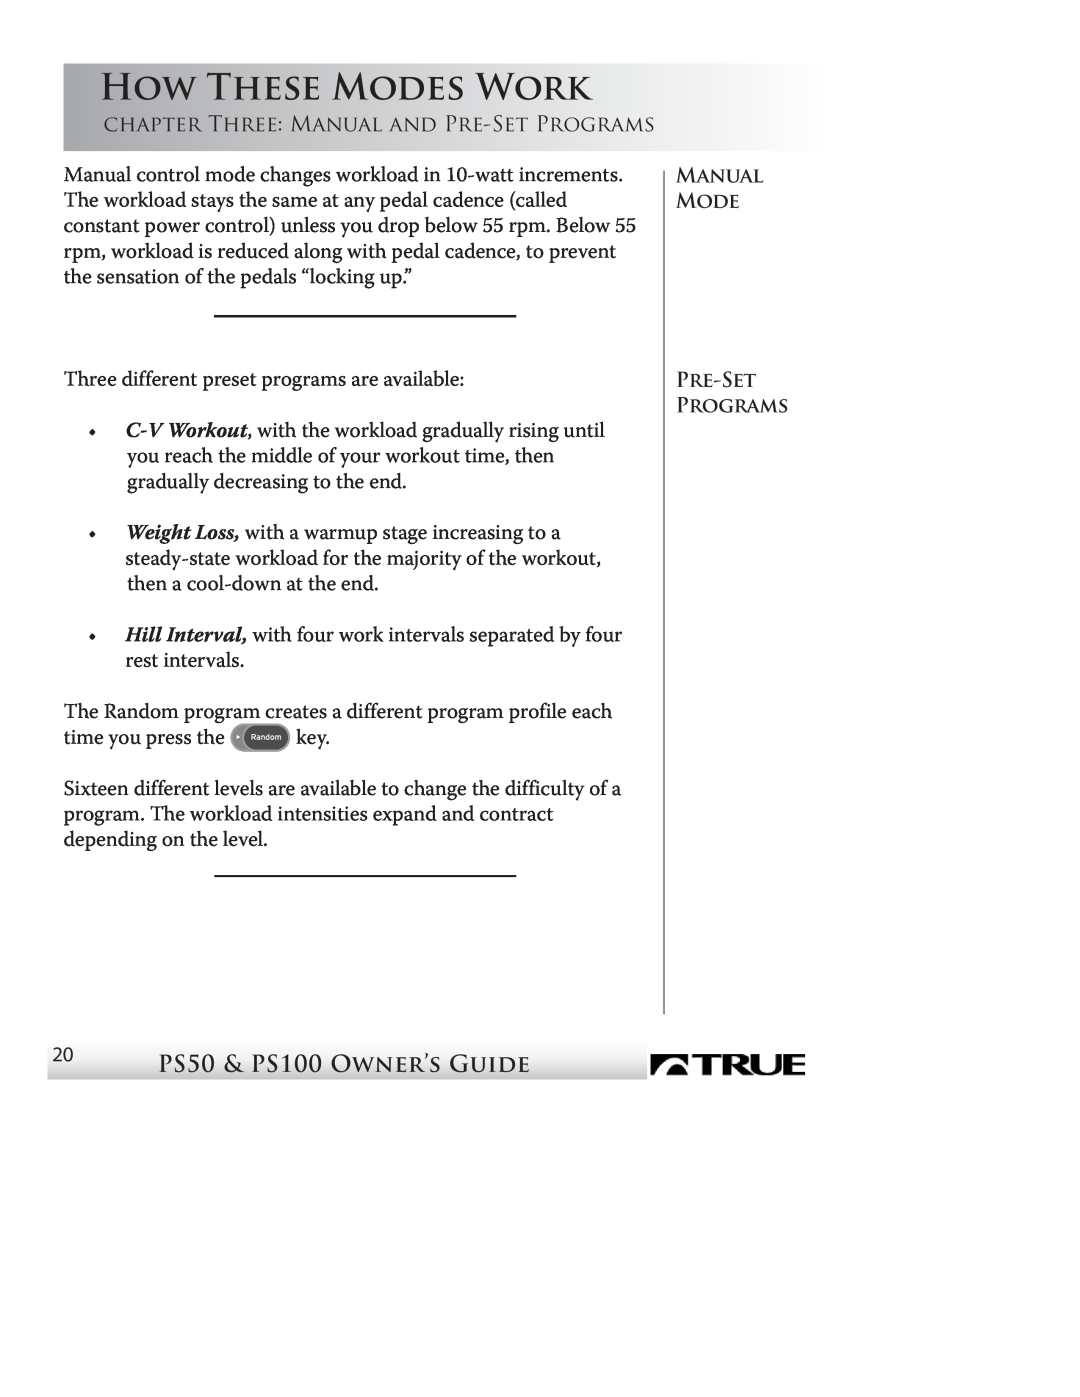 True Fitness P100 manual How These Modes Work, 20 PS50 & PS100 Owner’s Guide 